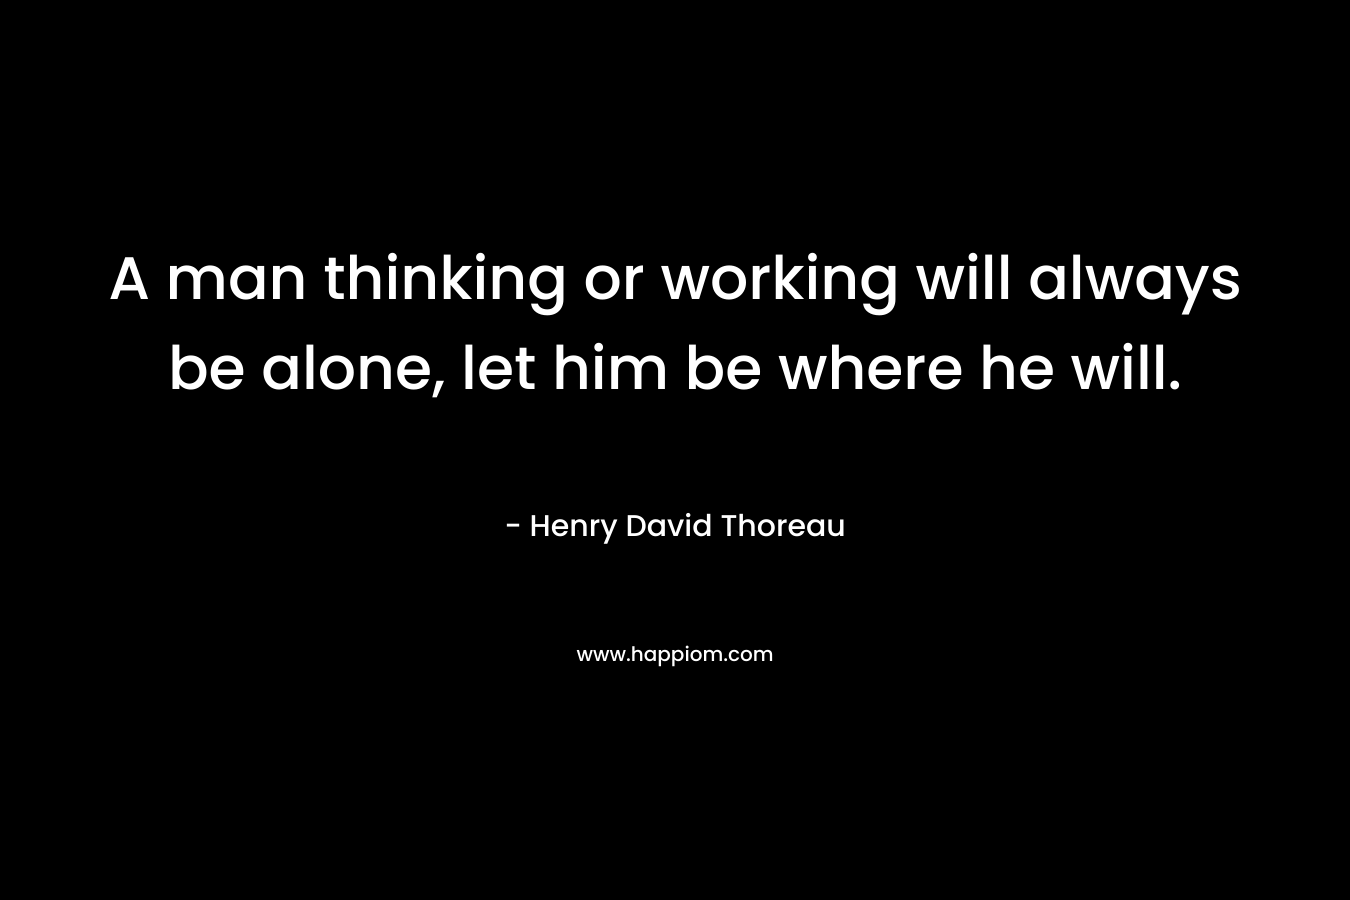 A man thinking or working will always be alone, let him be where he will.